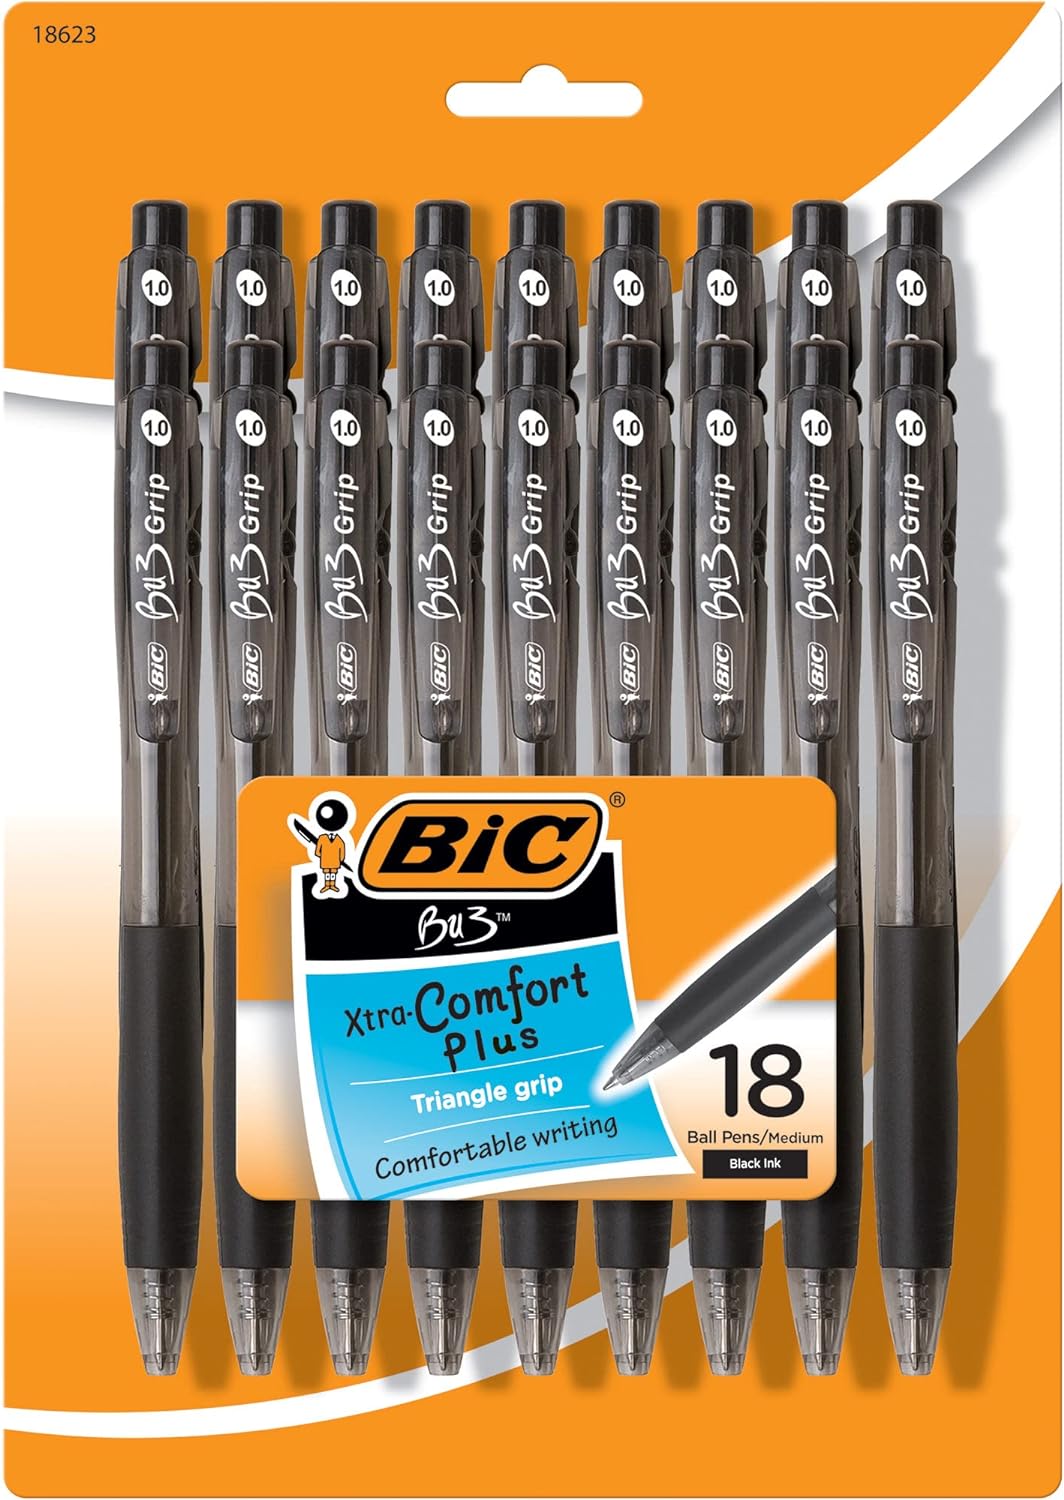 BIC BU3 Grip Retractable Ballpoint Pen, Medium Point (1.0mm), Black, Side Click Retraction For Added Convenience, 18-Count